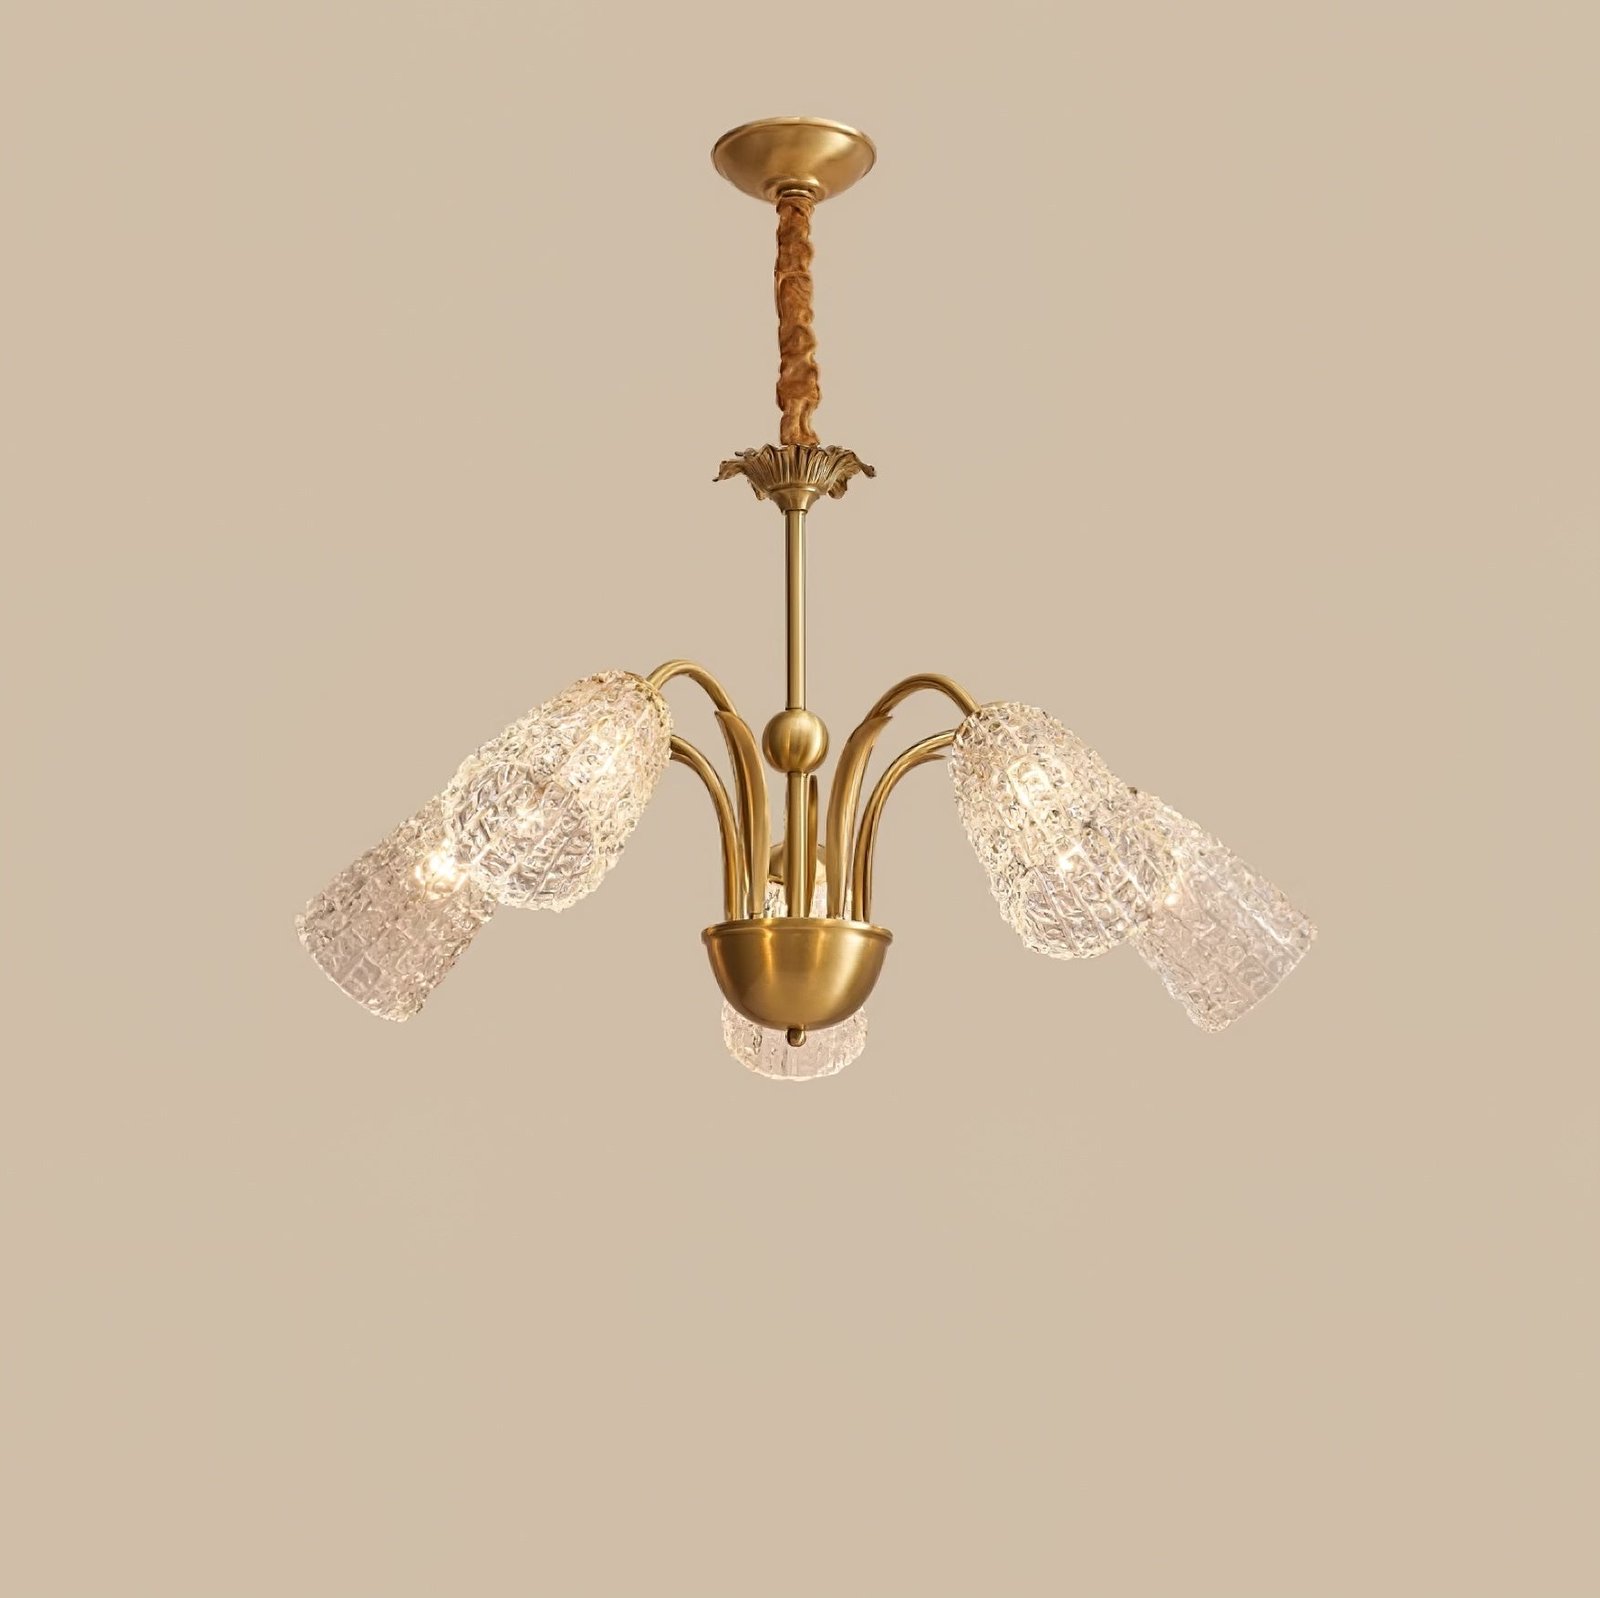 Brass Clear Nikoll Chandelier with 5 Heads: Dimensions of 31.4" diameter x 15.3" height (80cm dia x 39cm H)